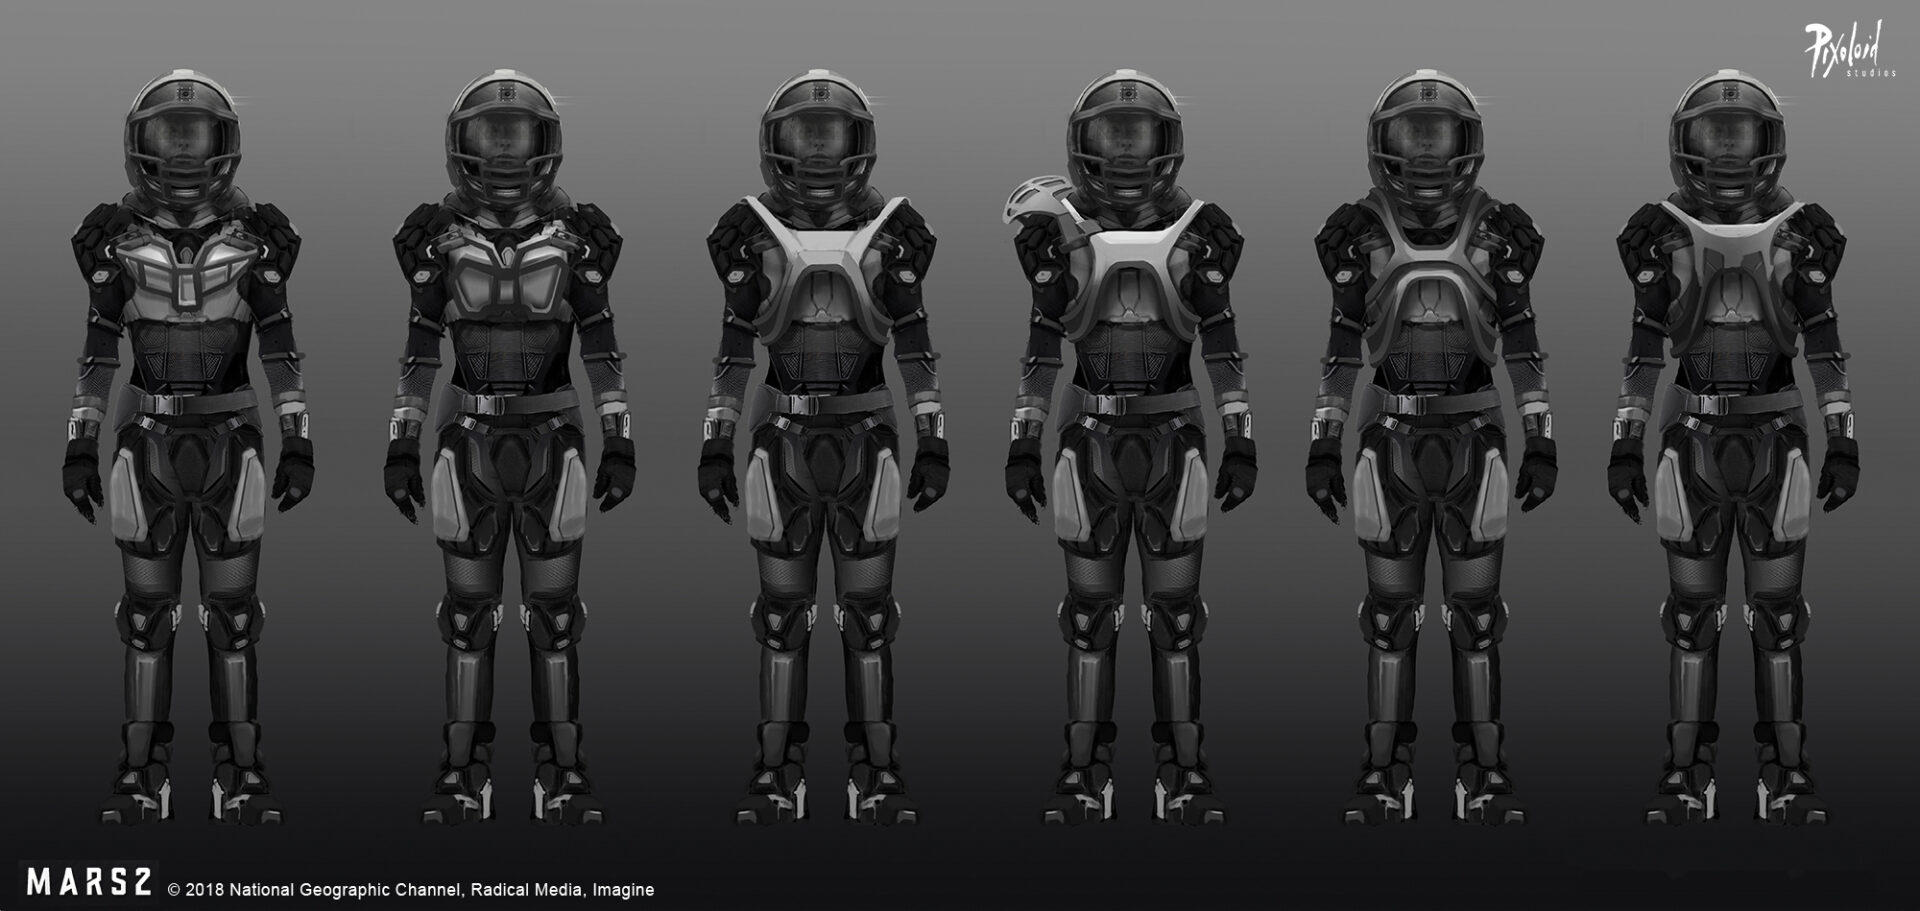 Space suit / costume design for MARS series / National Geographic